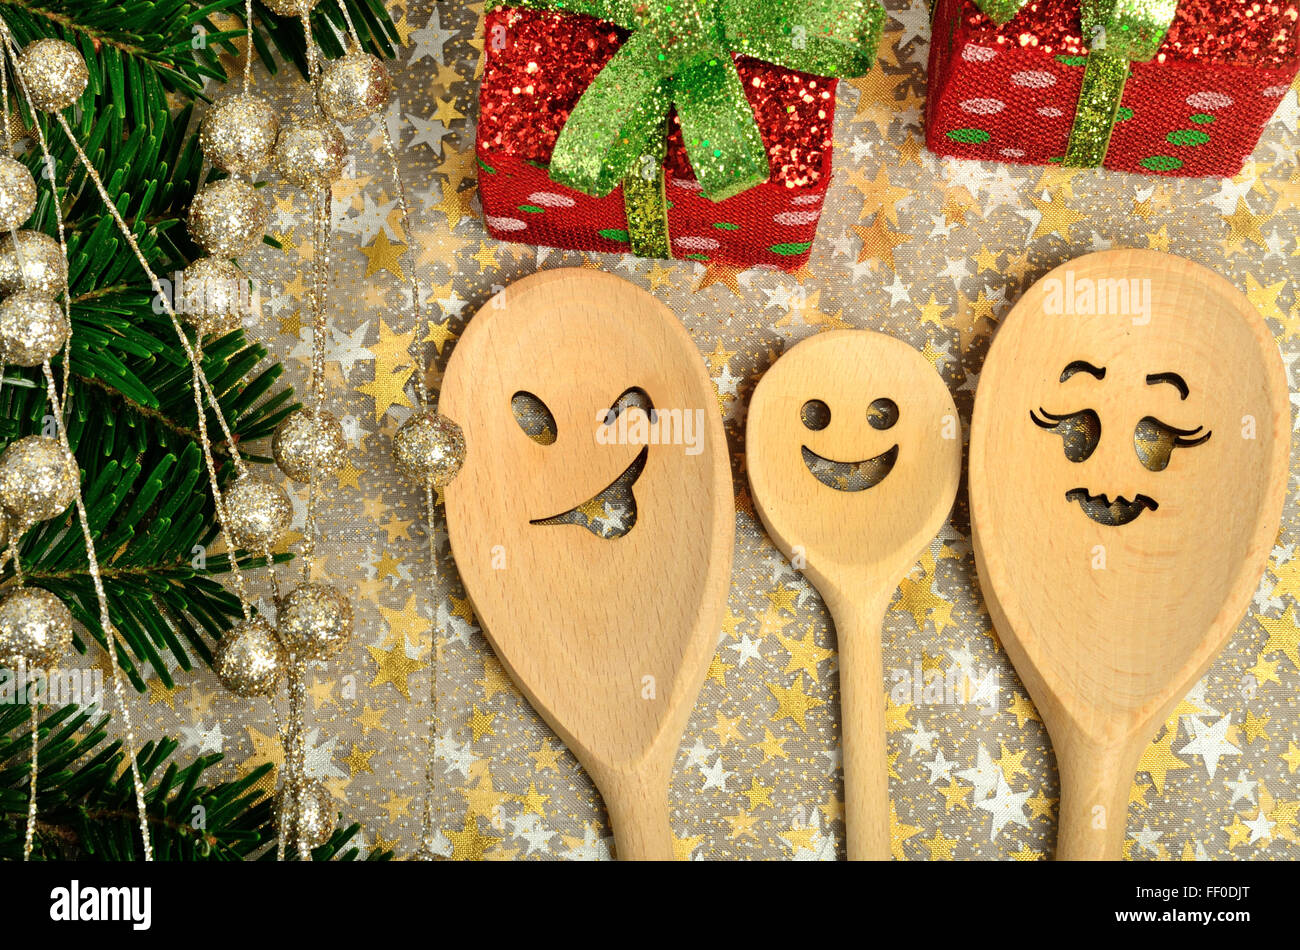 Family wooden spoon with tree branch and box christmas Stock Photo